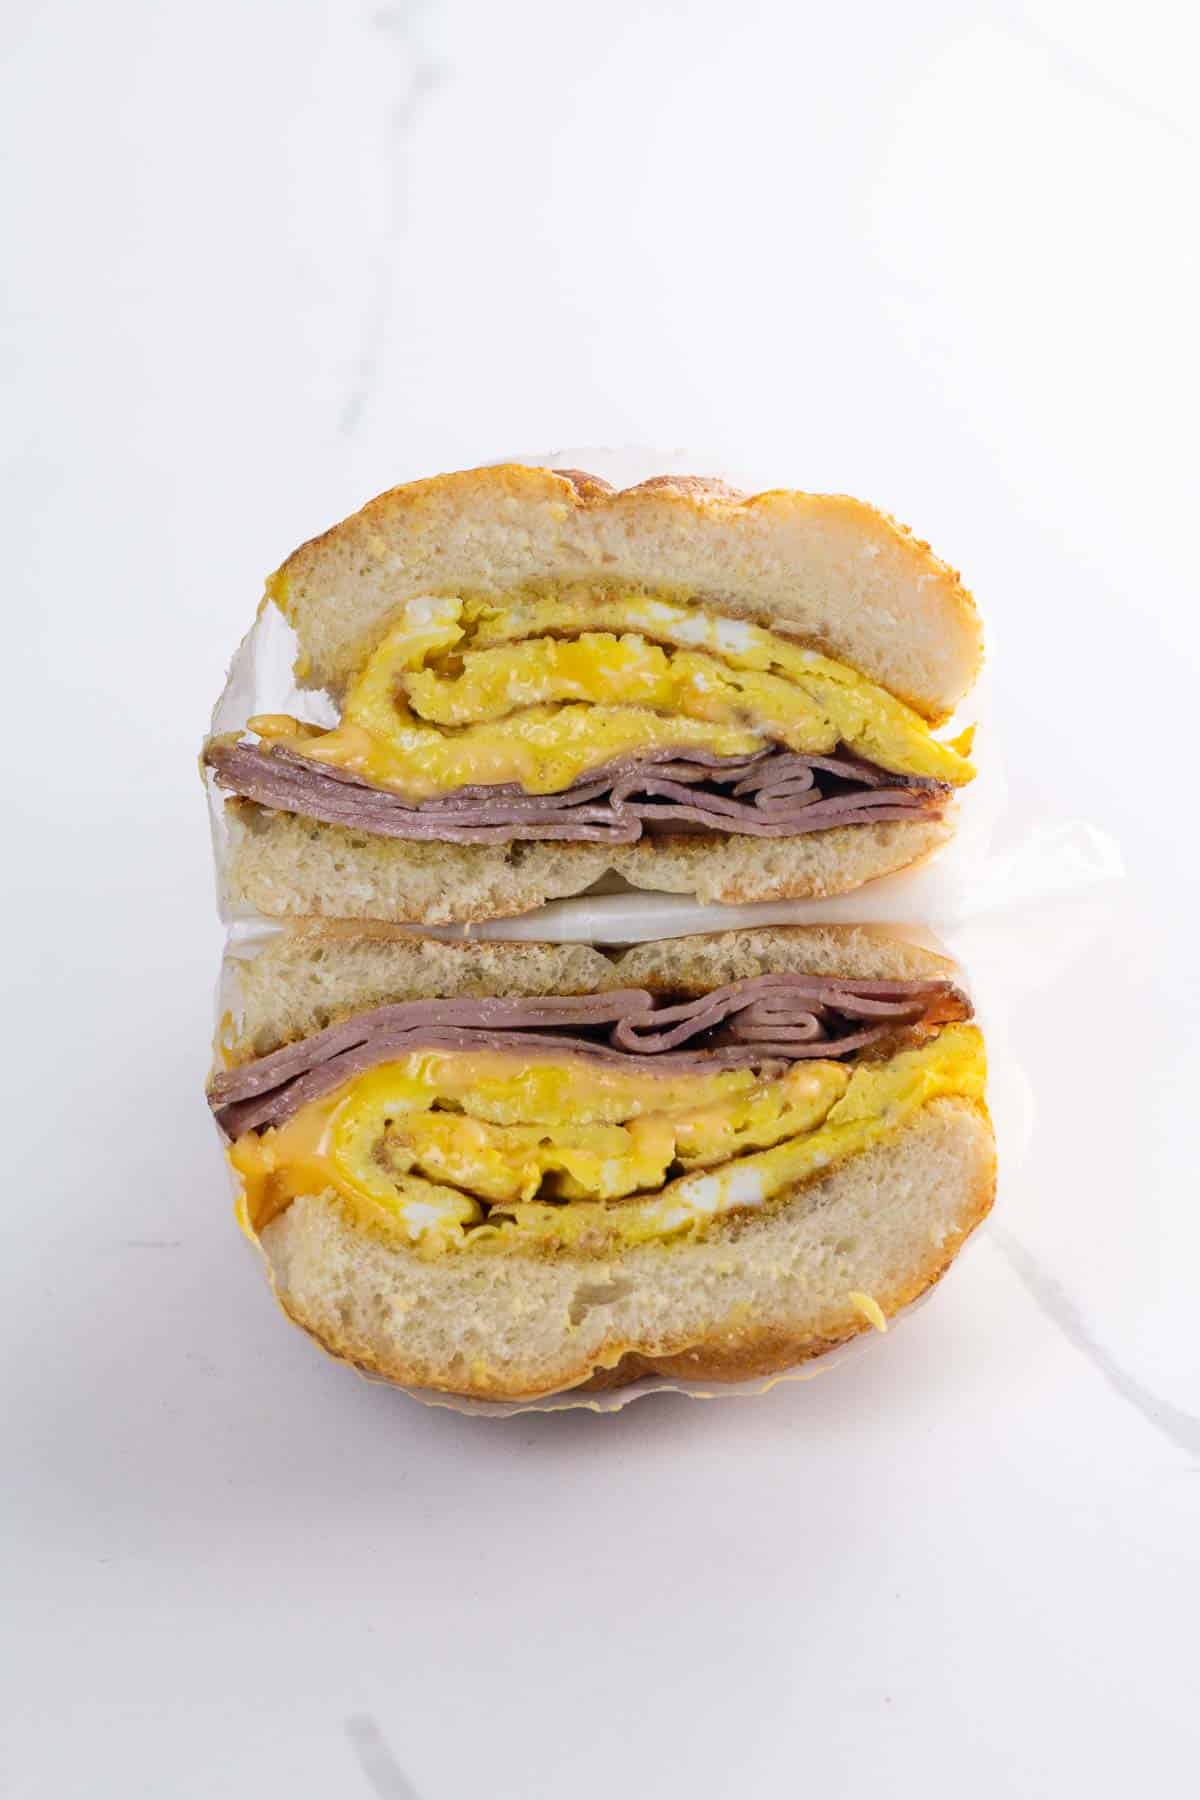 a ham egg and cheese sandwich on a kaiser roll wrapped in deli paper